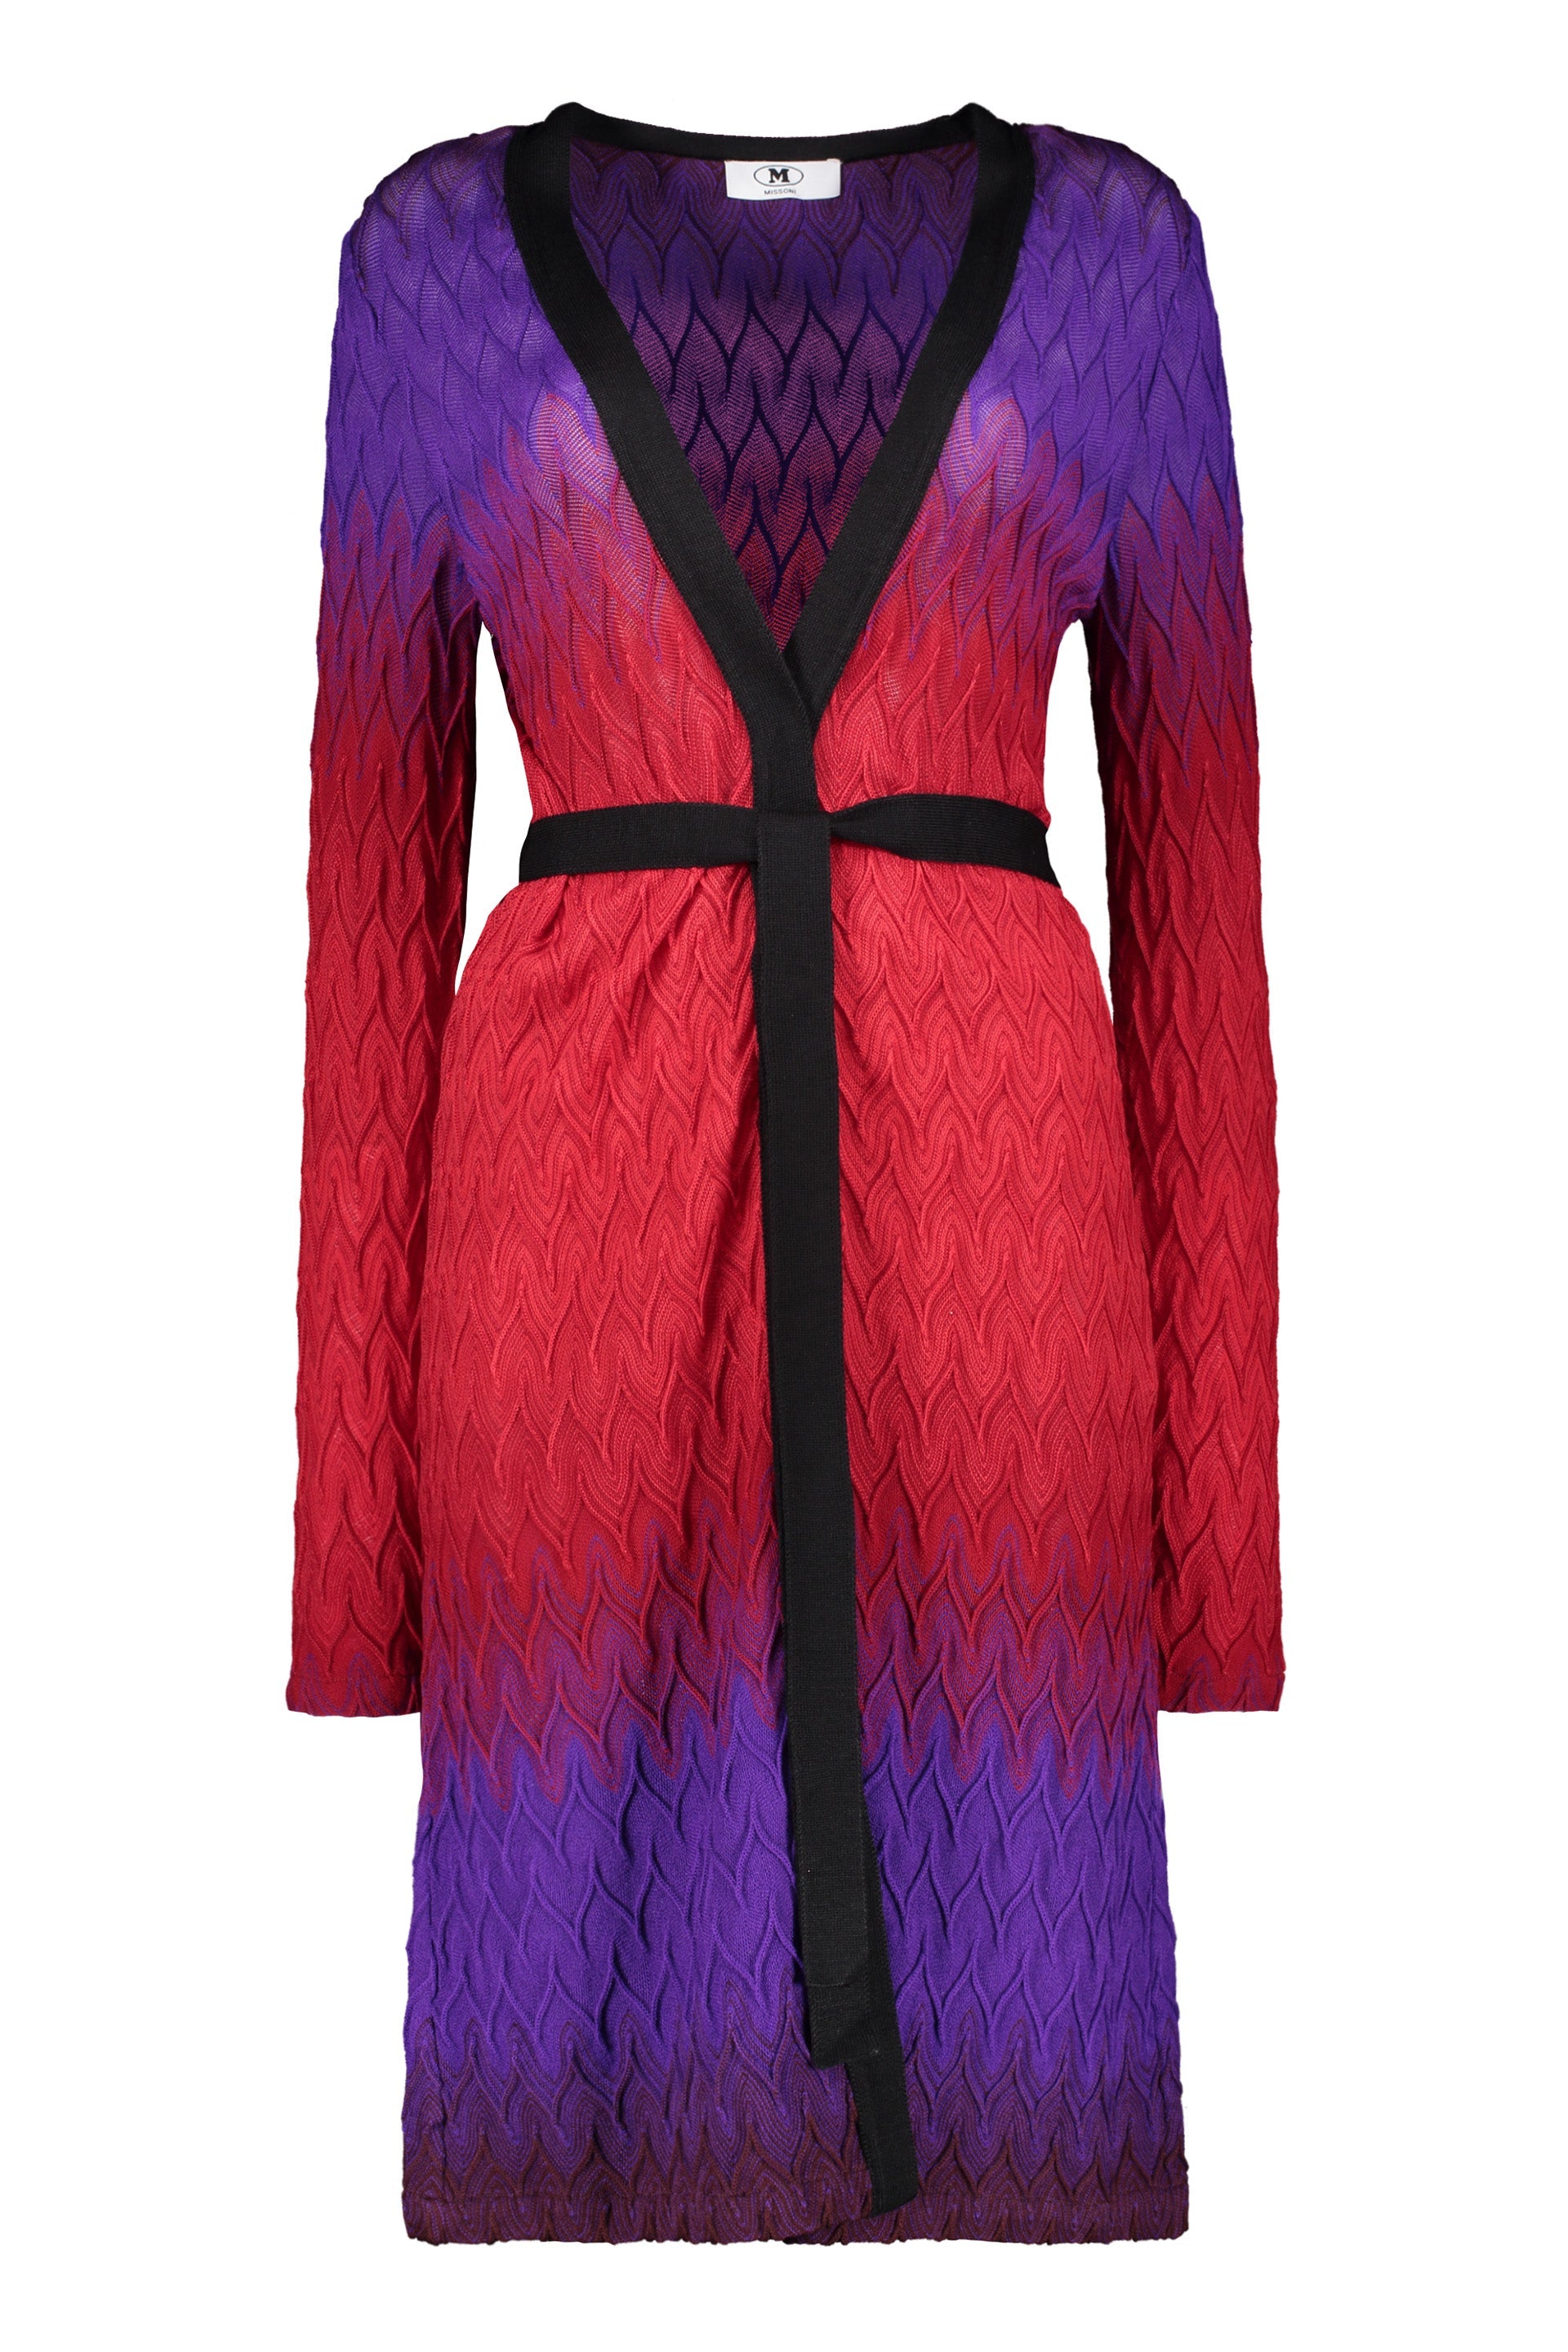 Missoni-OUTLET-SALE-Long-wool-cardigan-Strick-L-ARCHIVE-COLLECTION_58e6a3c2-472c-40fd-a2fc-8eb0baba178d.jpg